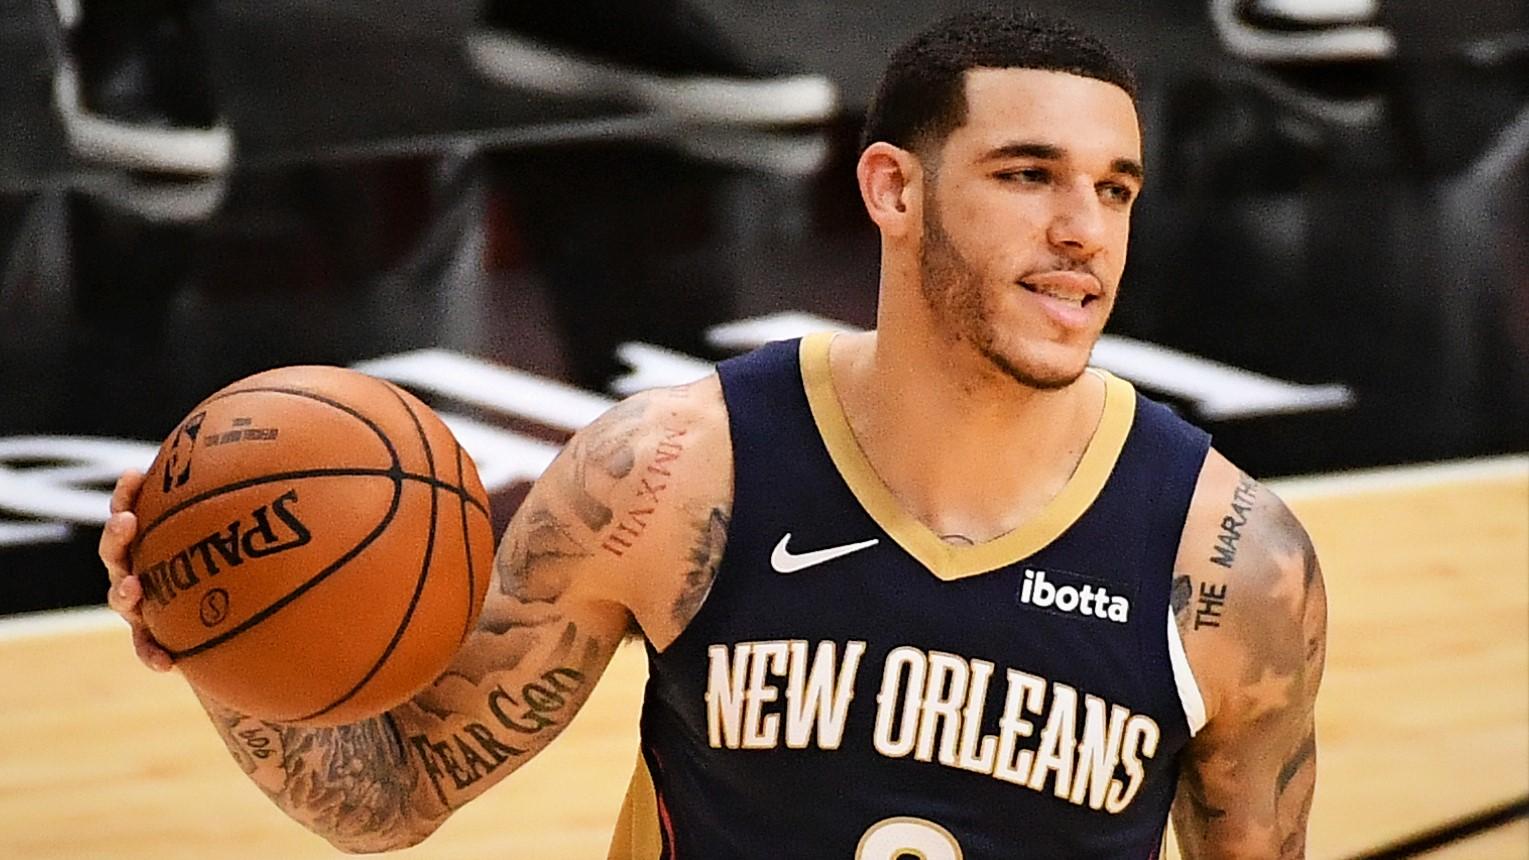 Dec 14, 2020; Miami, Florida, USA; New Orleans Pelicans guard Lonzo Ball (2) dribbles the ball against the Miami Heat during the first half at American Airlines Arena. Mandatory Credit: Jasen Vinlove-USA TODAY Sports / © Jasen Vinlove-USA TODAY Sports